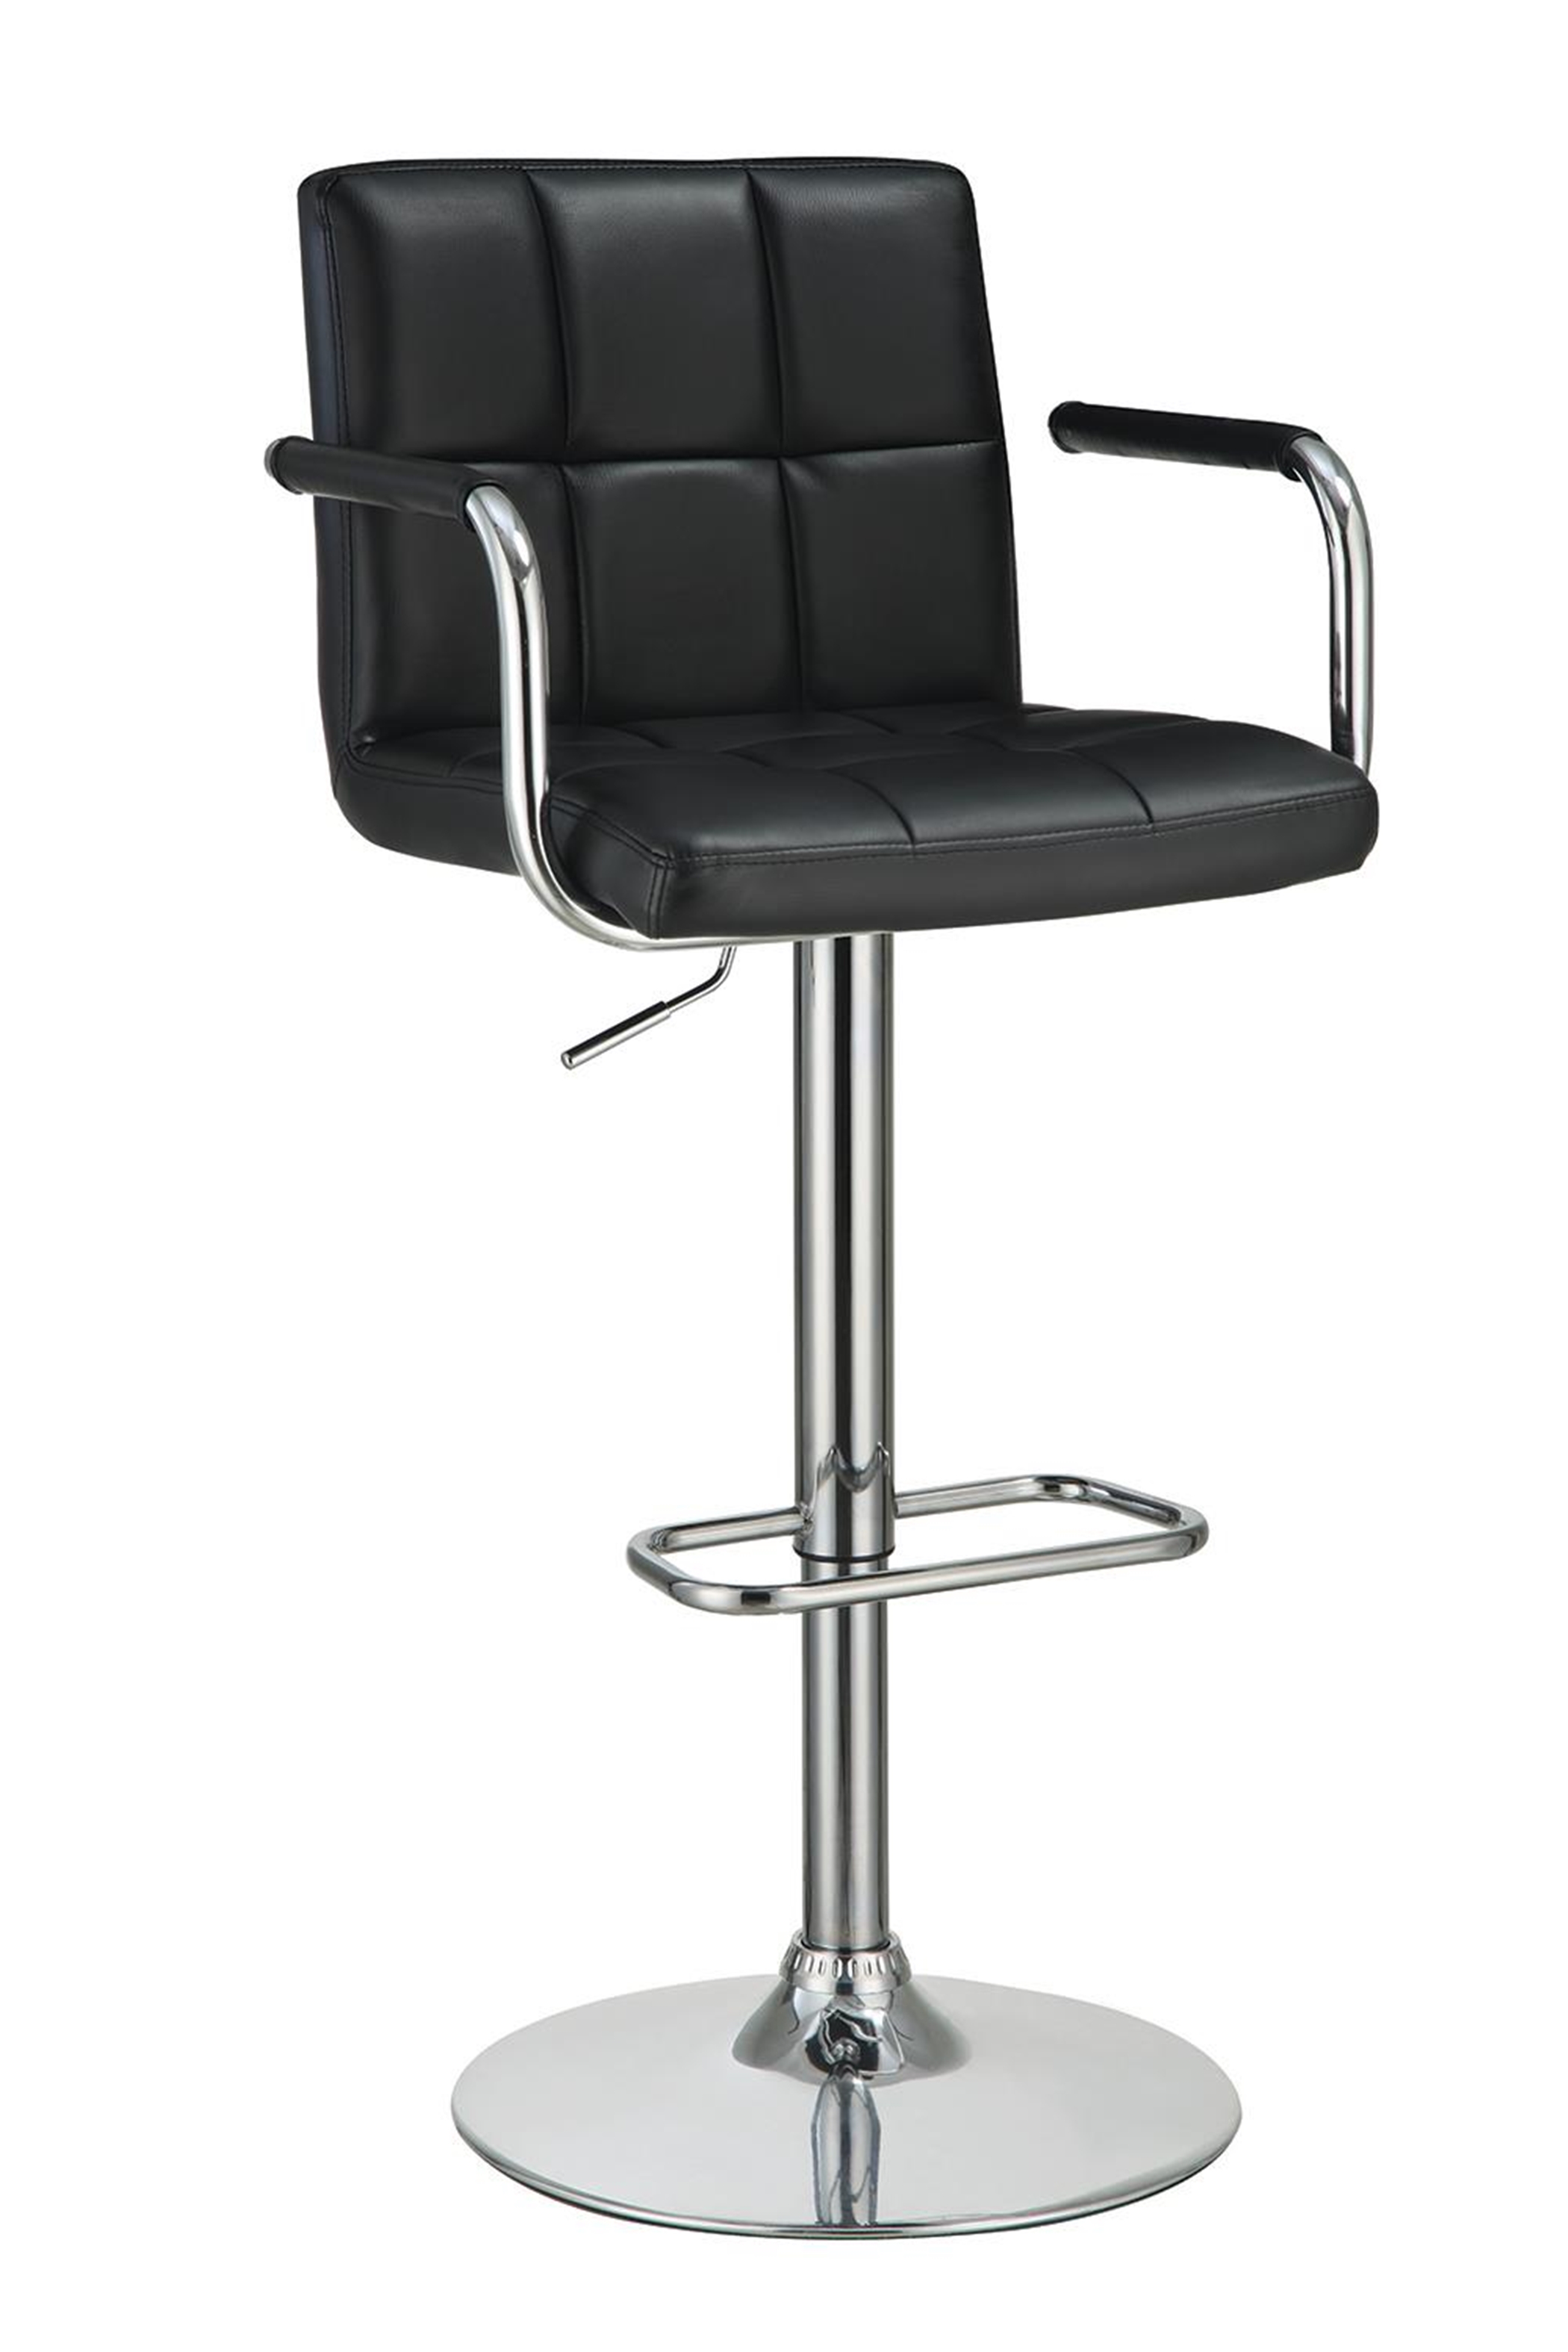 Contemporary Black and Chrome Adjustable Bar Stool with Arms - Click Image to Close